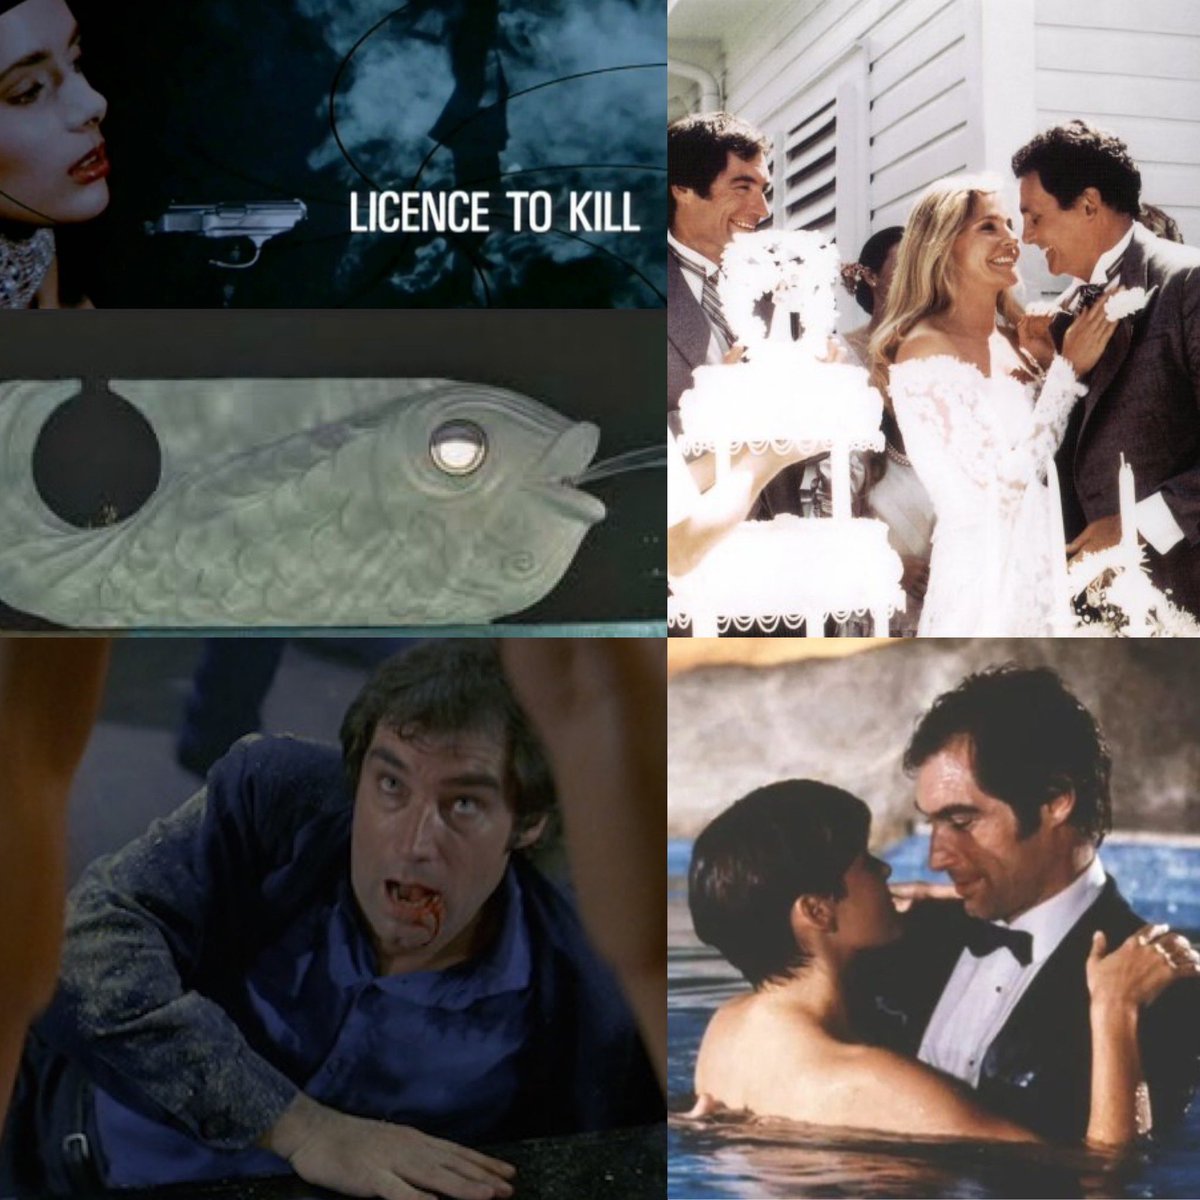 One Movie, All Great Songs…
#LicenceToKill #JamesBond

youtu.be/cPx9misxeiw